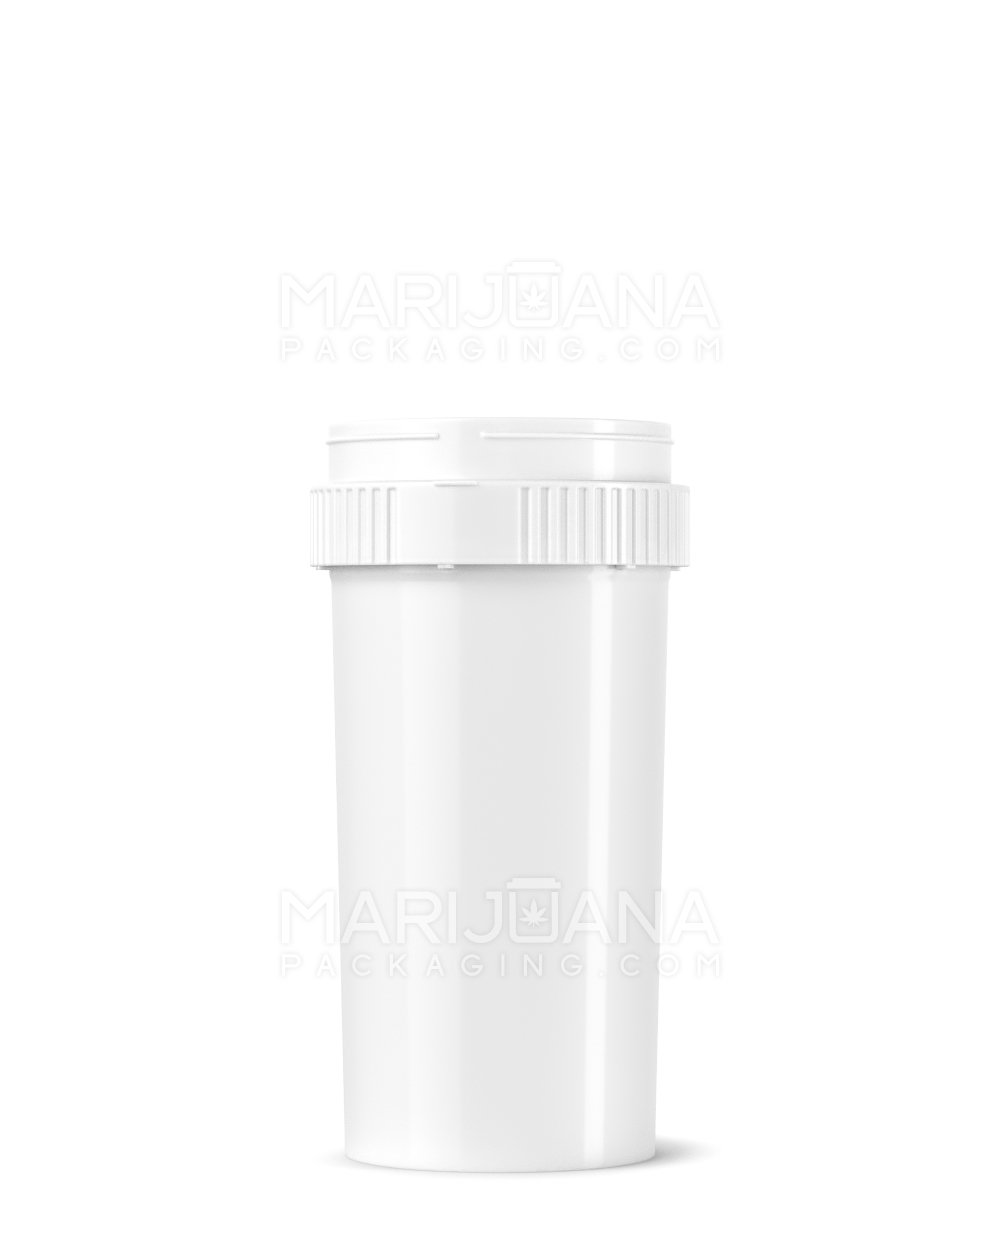 Child Resistant | Push & Turn Vial with Grinder Cap | 40dr - White Plastic - 150 Count - 4